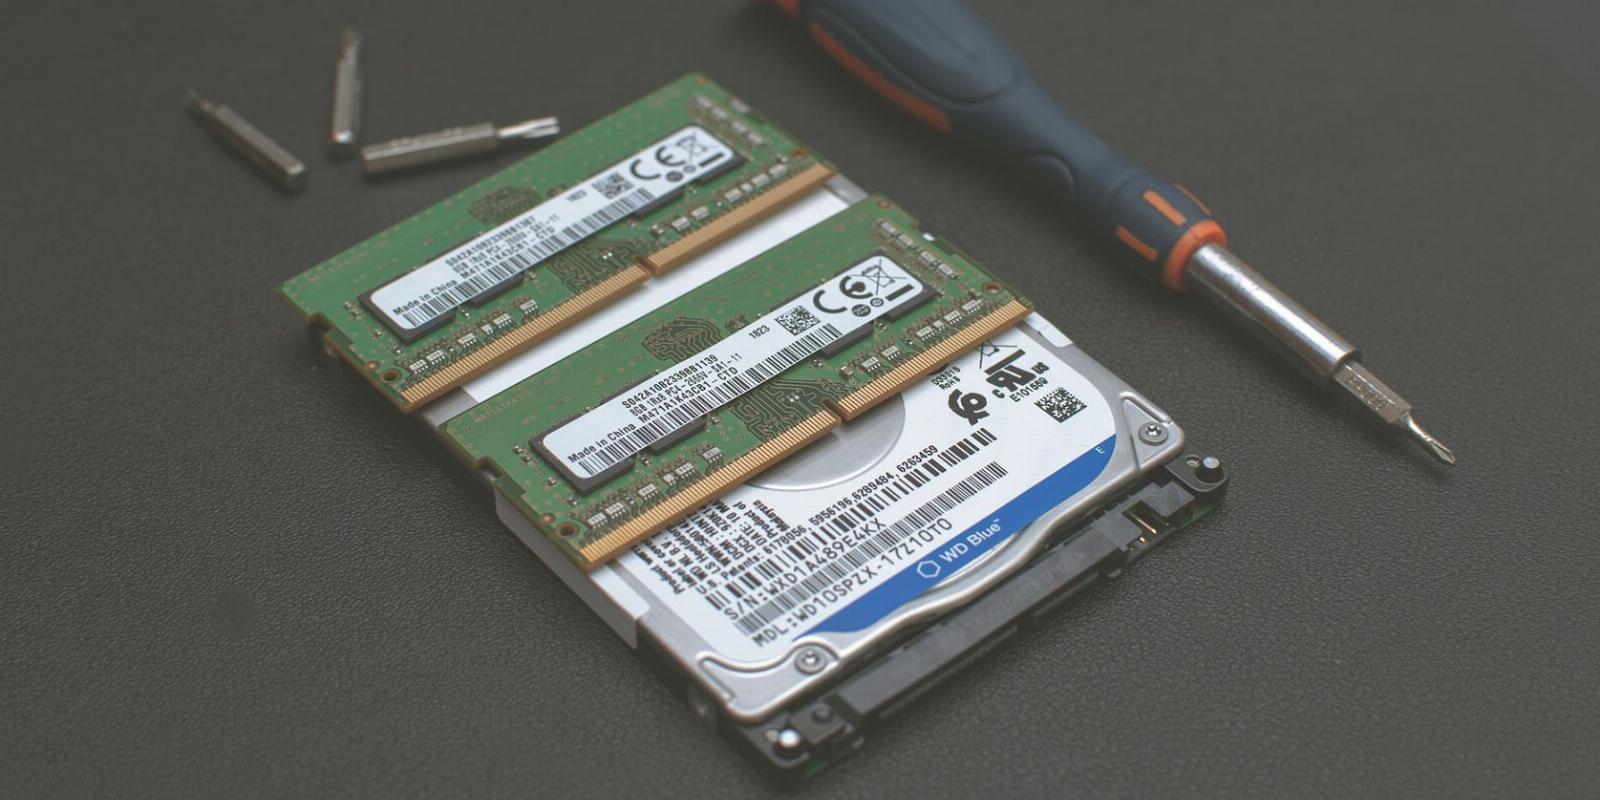 RAM vs. HDD: What’s the Difference?